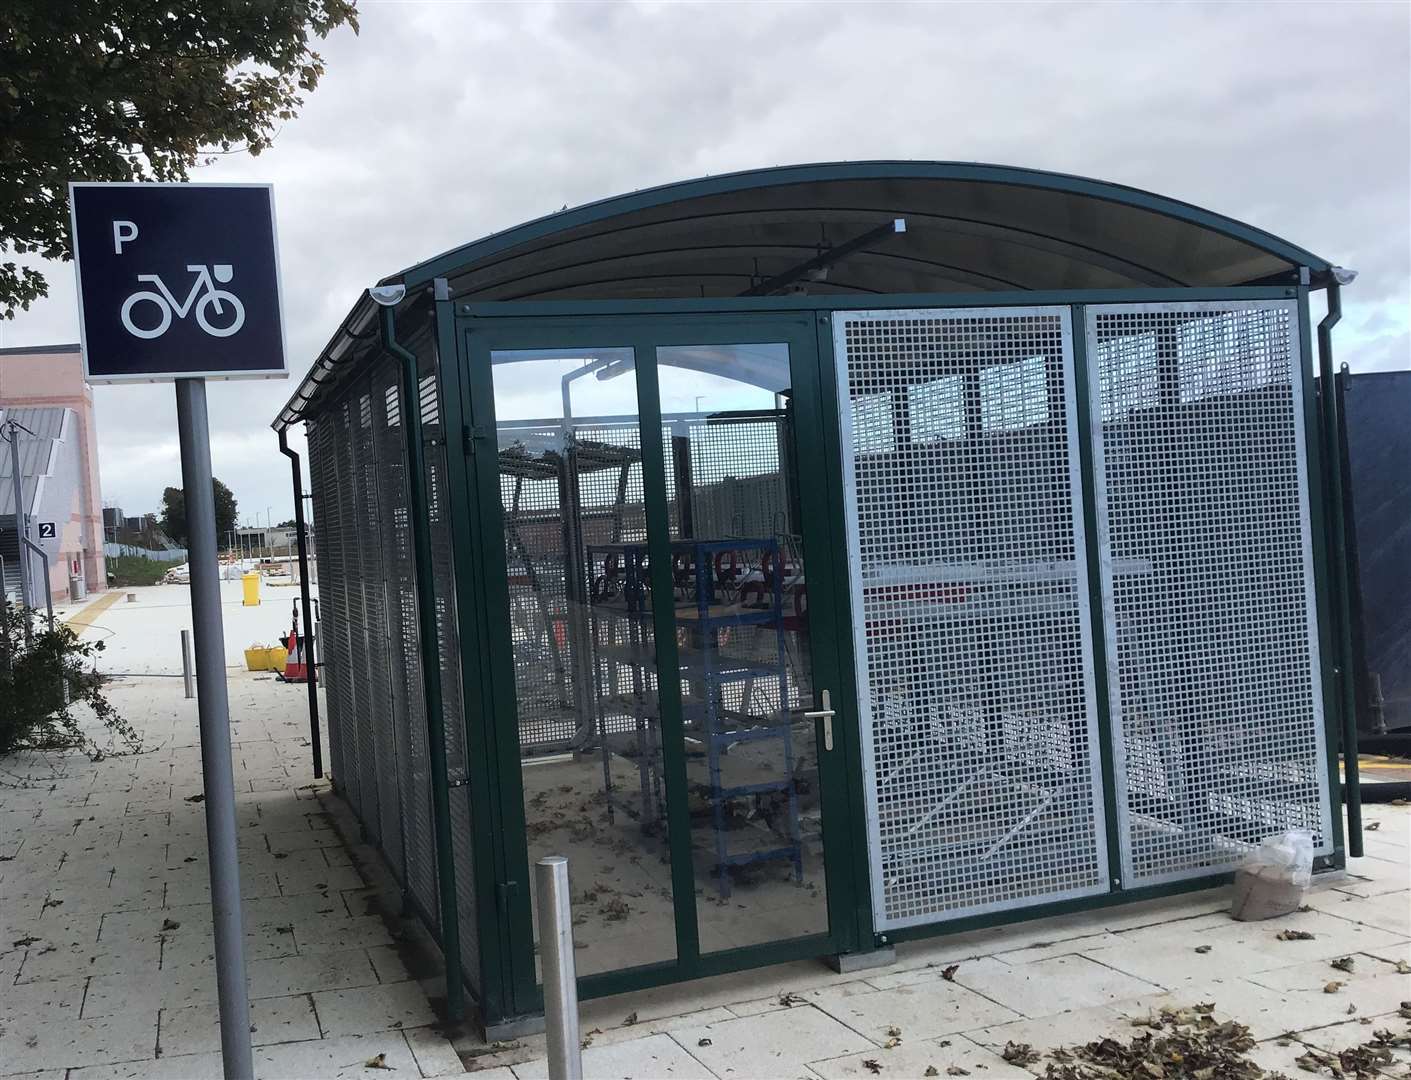 Enclosed bicycle storage at the station